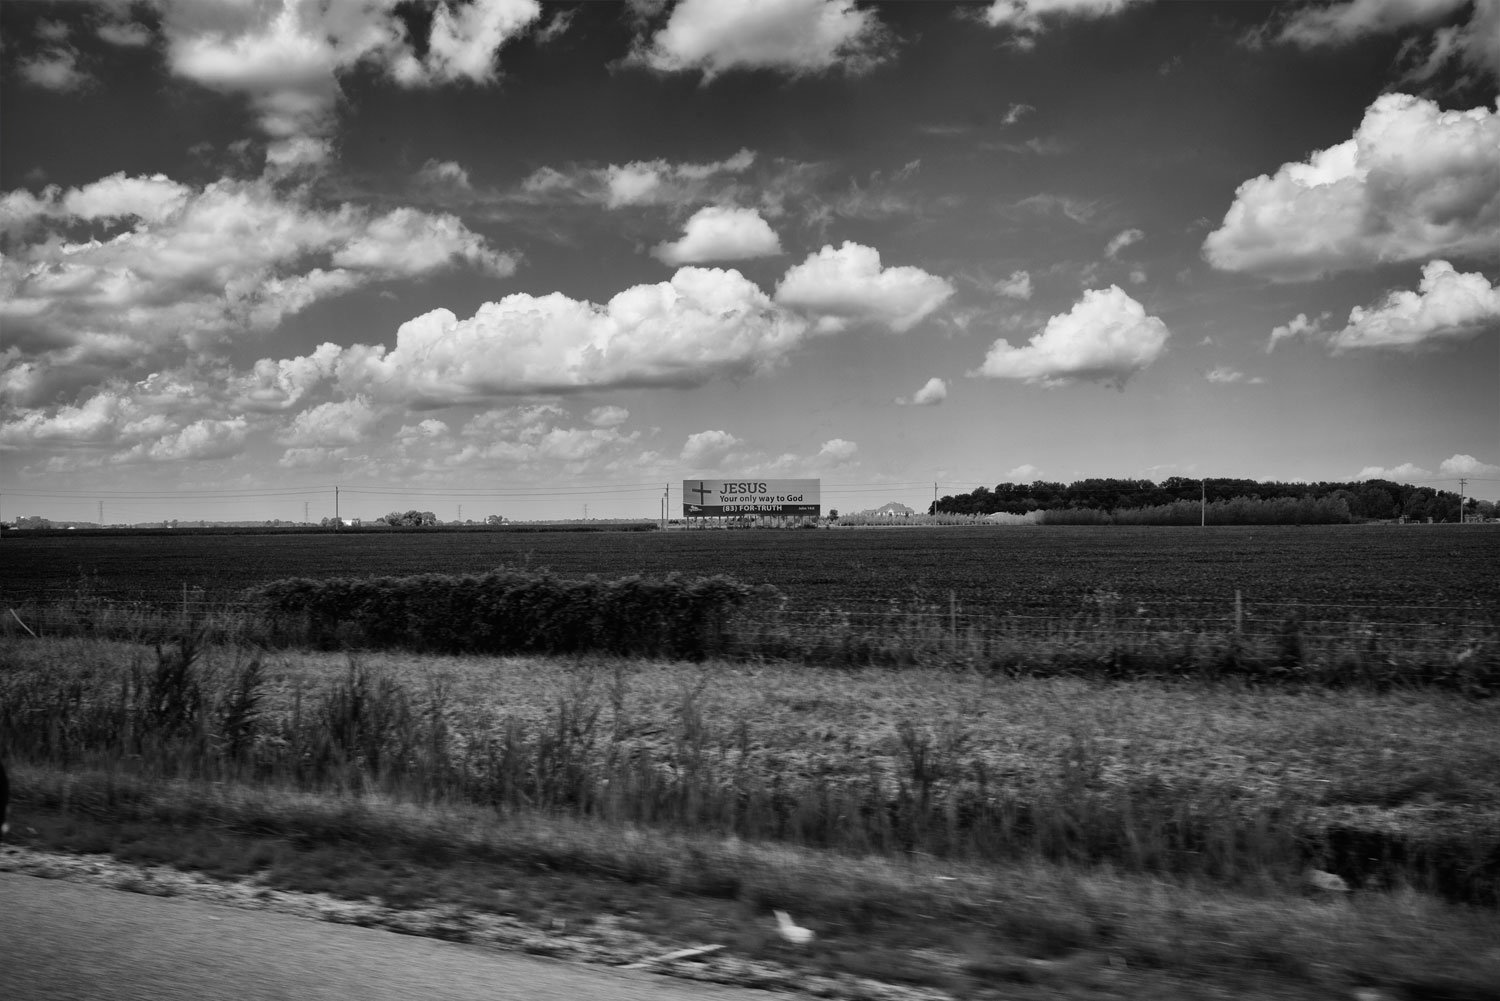 Interstate 80 somewhere between Ohio and Indiana